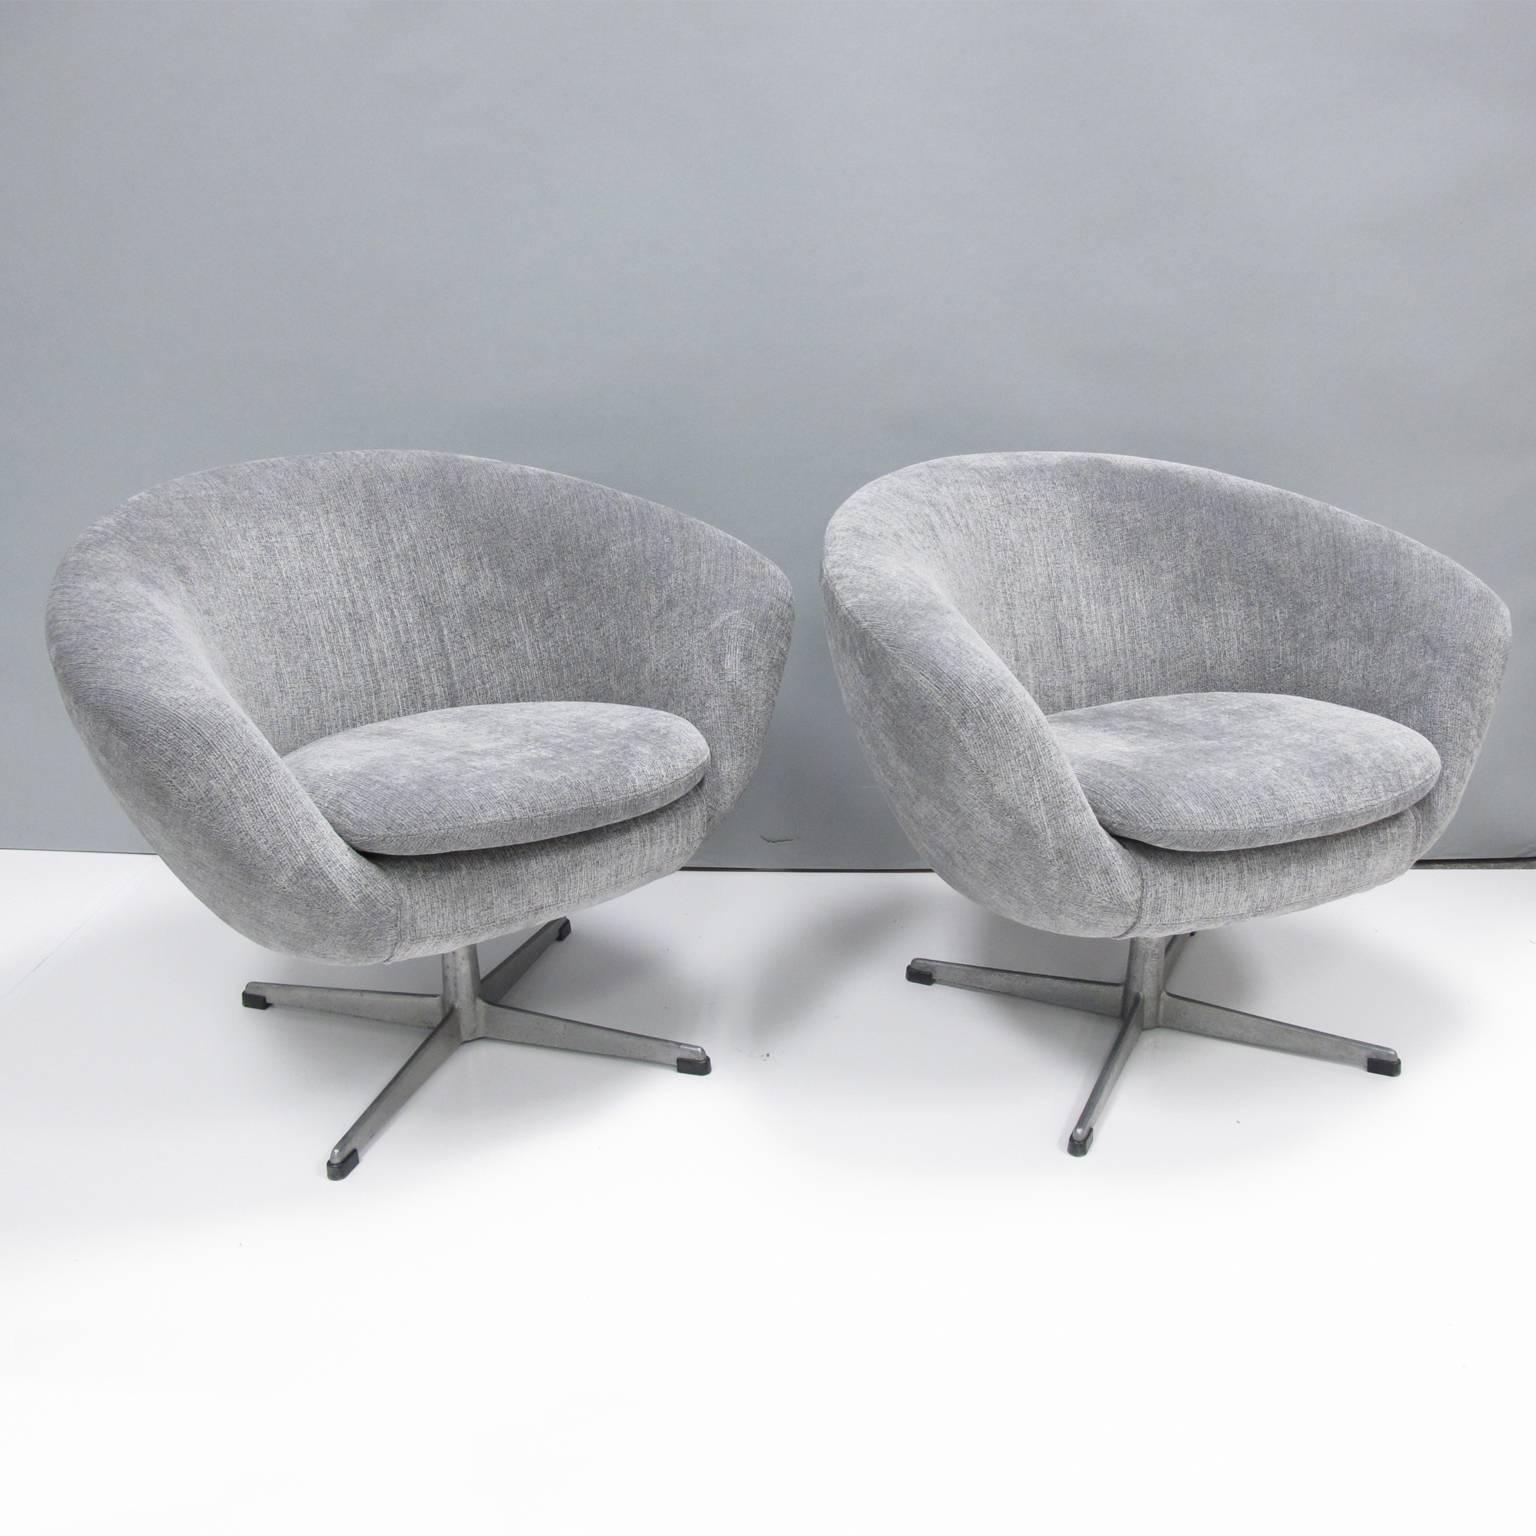 Elegant pair of swivel pod lounge chairs by Overman, Sweden, designed by Carl Eric Klote for the company. Lovely egg shape with four star pedestal metal base. Overman designs is noteworthy for the innovative use of expandable polystyrene foam as the